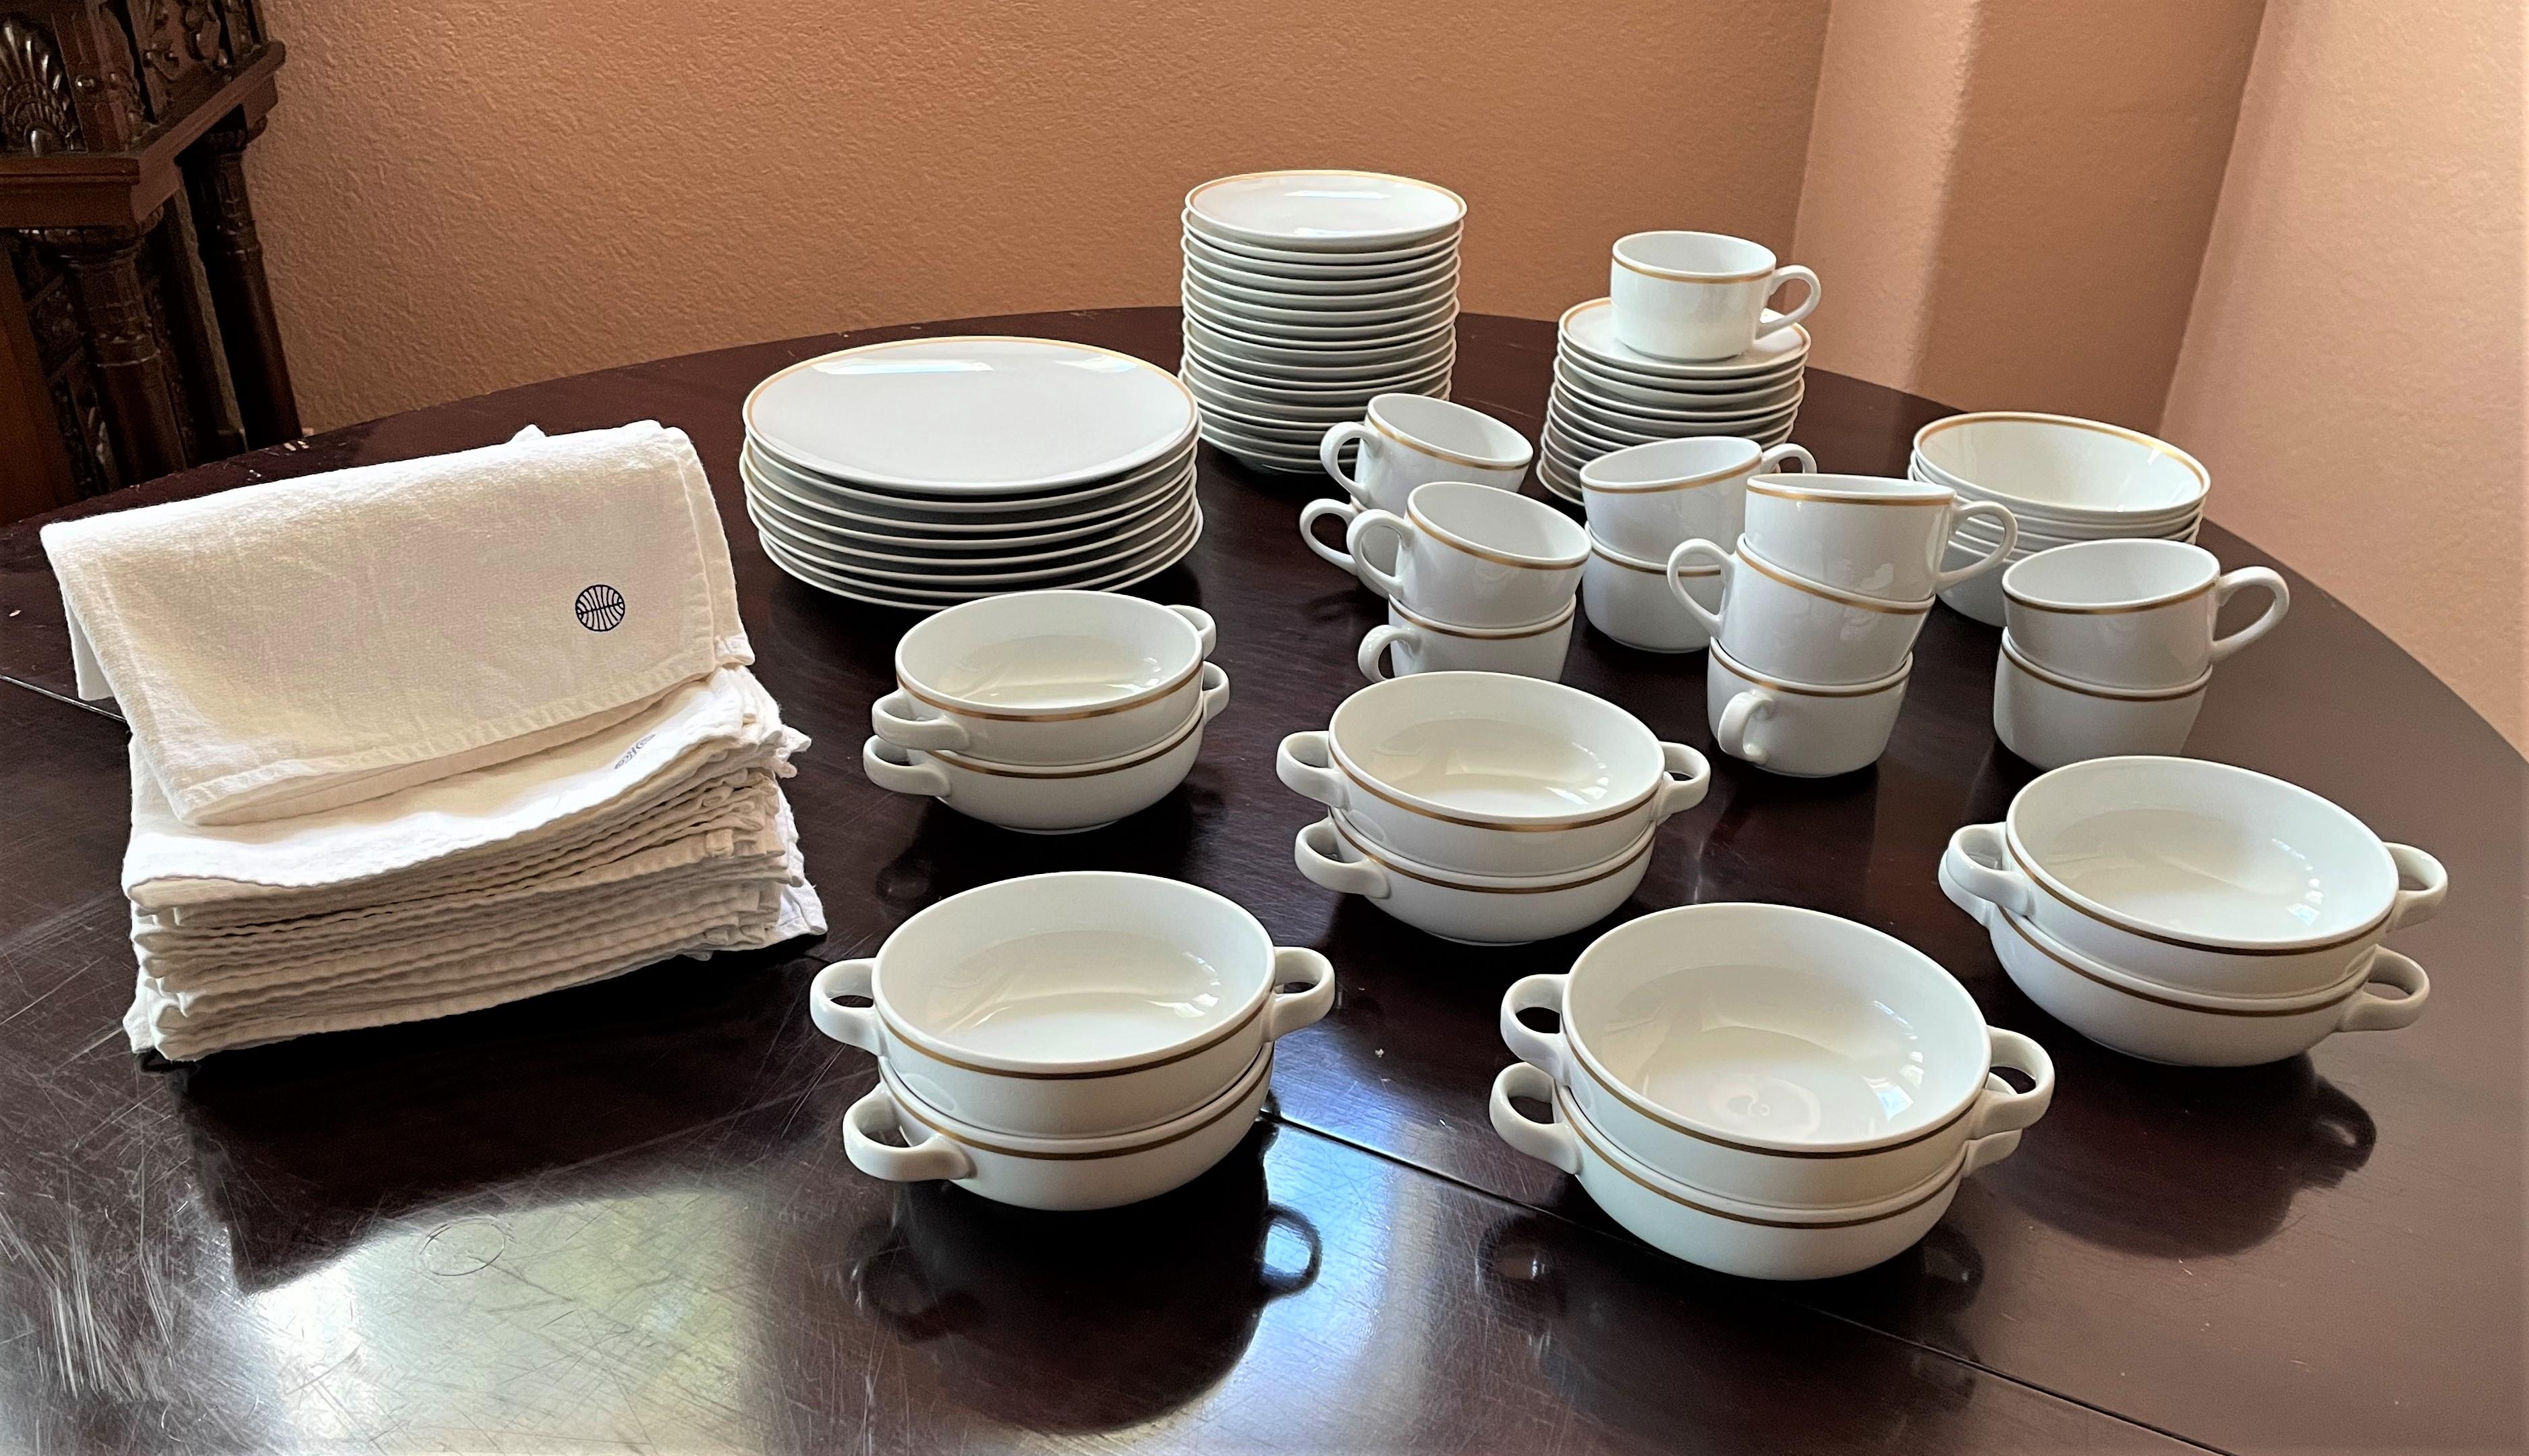 This vintage china service from the 1950s was made especially for Pan Am World Airways in Japan by Noritake. It was used on the iconic airline's trans-Atlantic flights in the 1950's, for First-Class passengers traveling from New York to London and